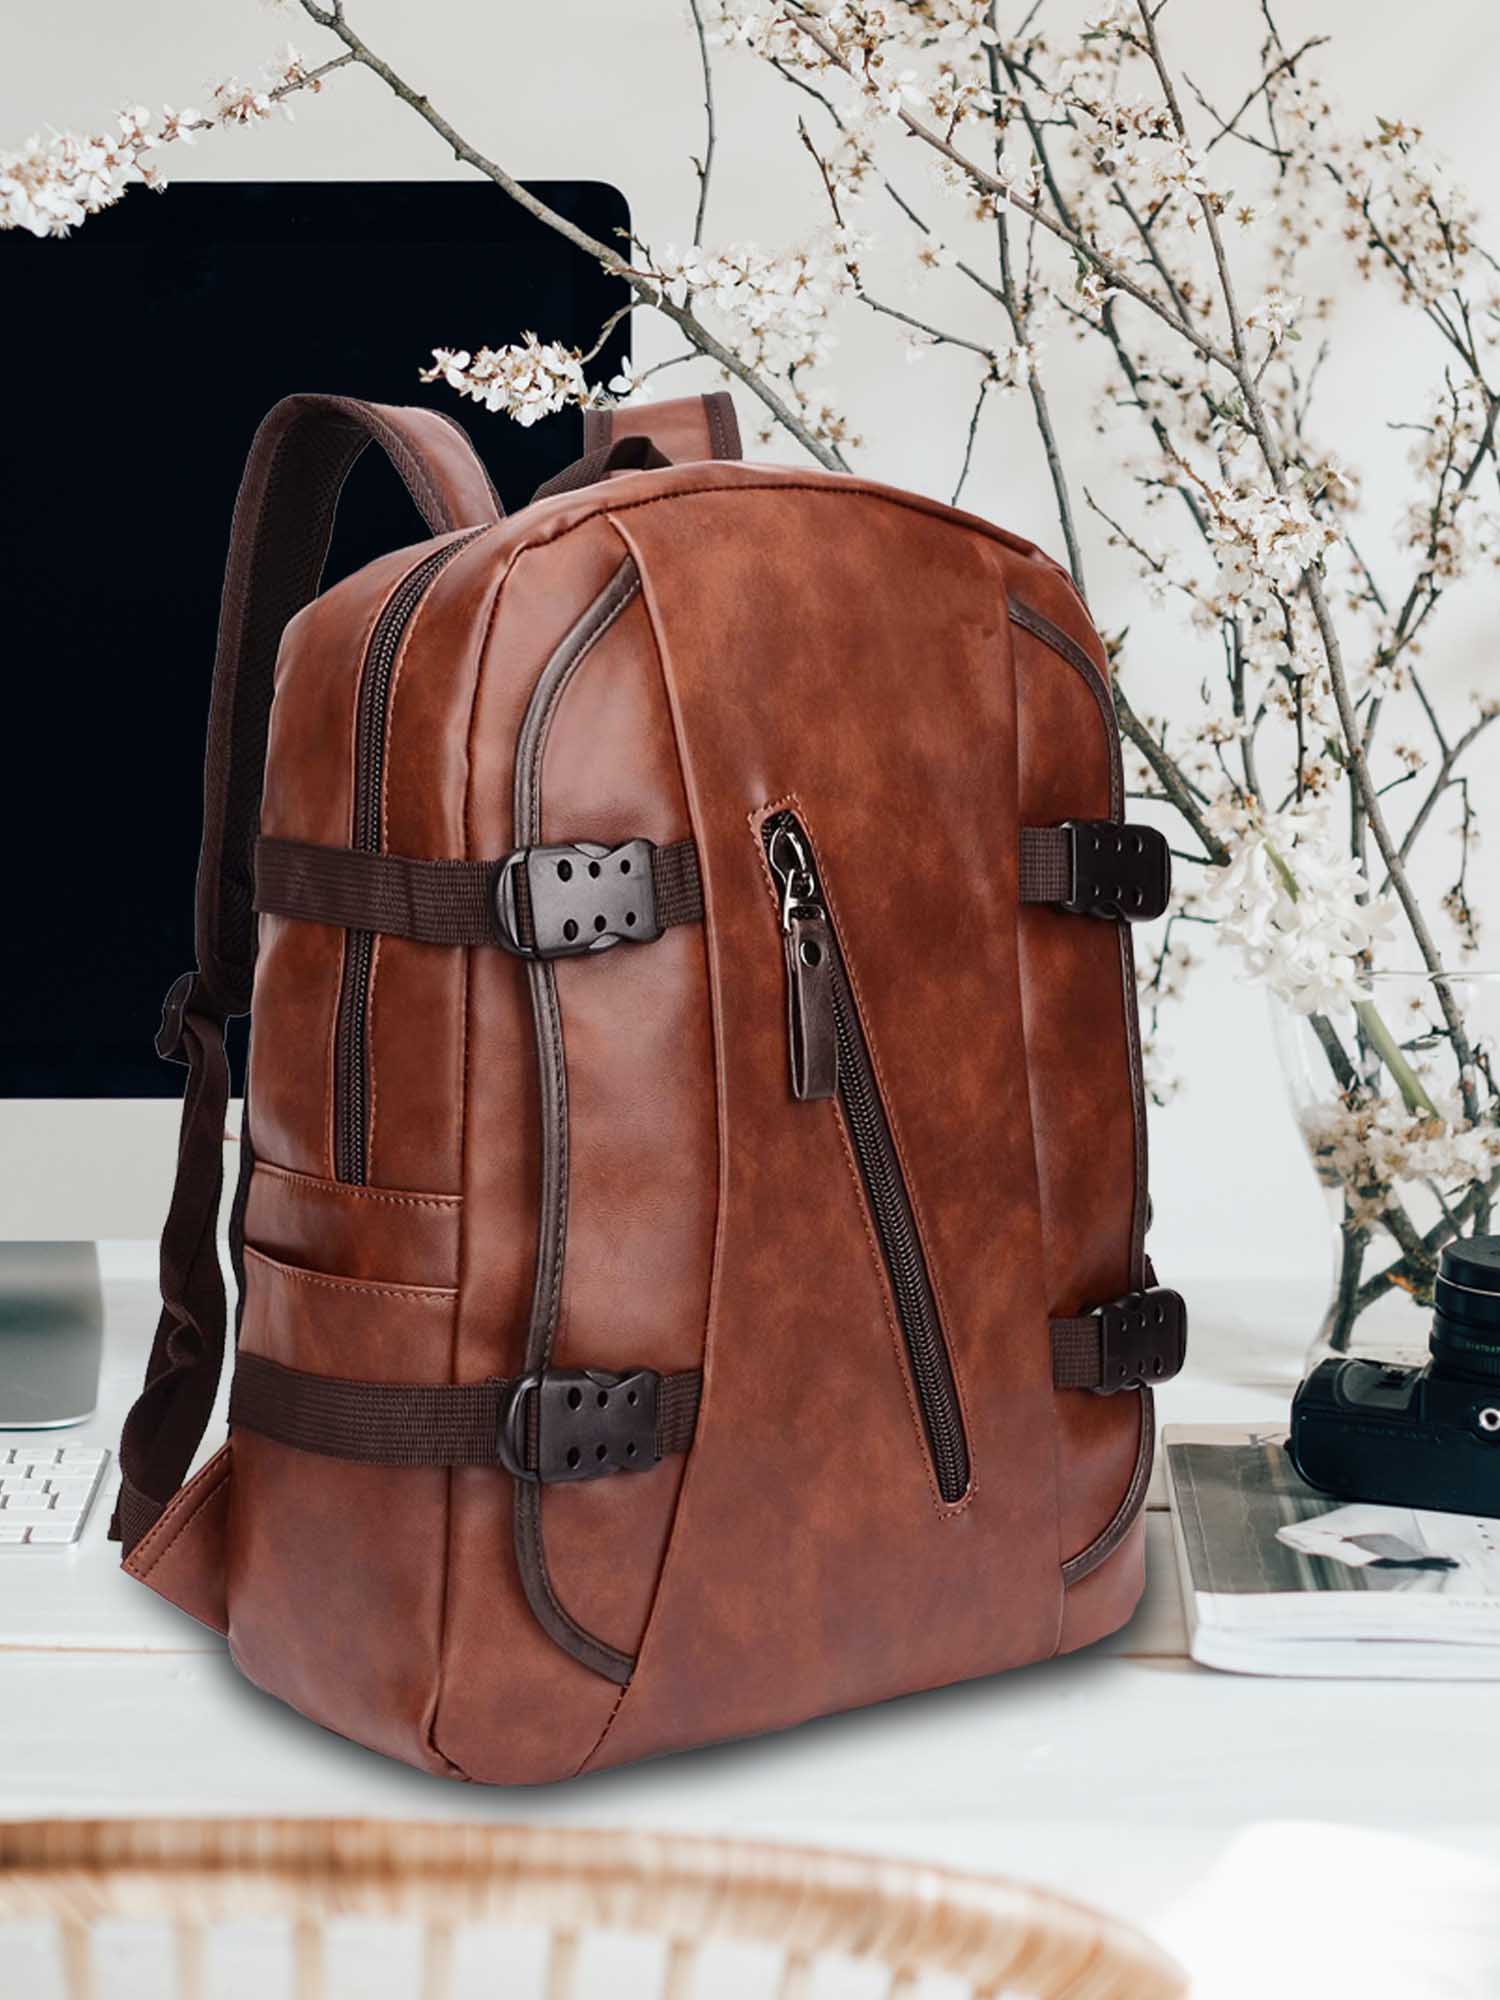 Long Handle Leather Bag | Brown Colour Stylish Sling Bag for Women - Leather  Bags - FOLKWAYS